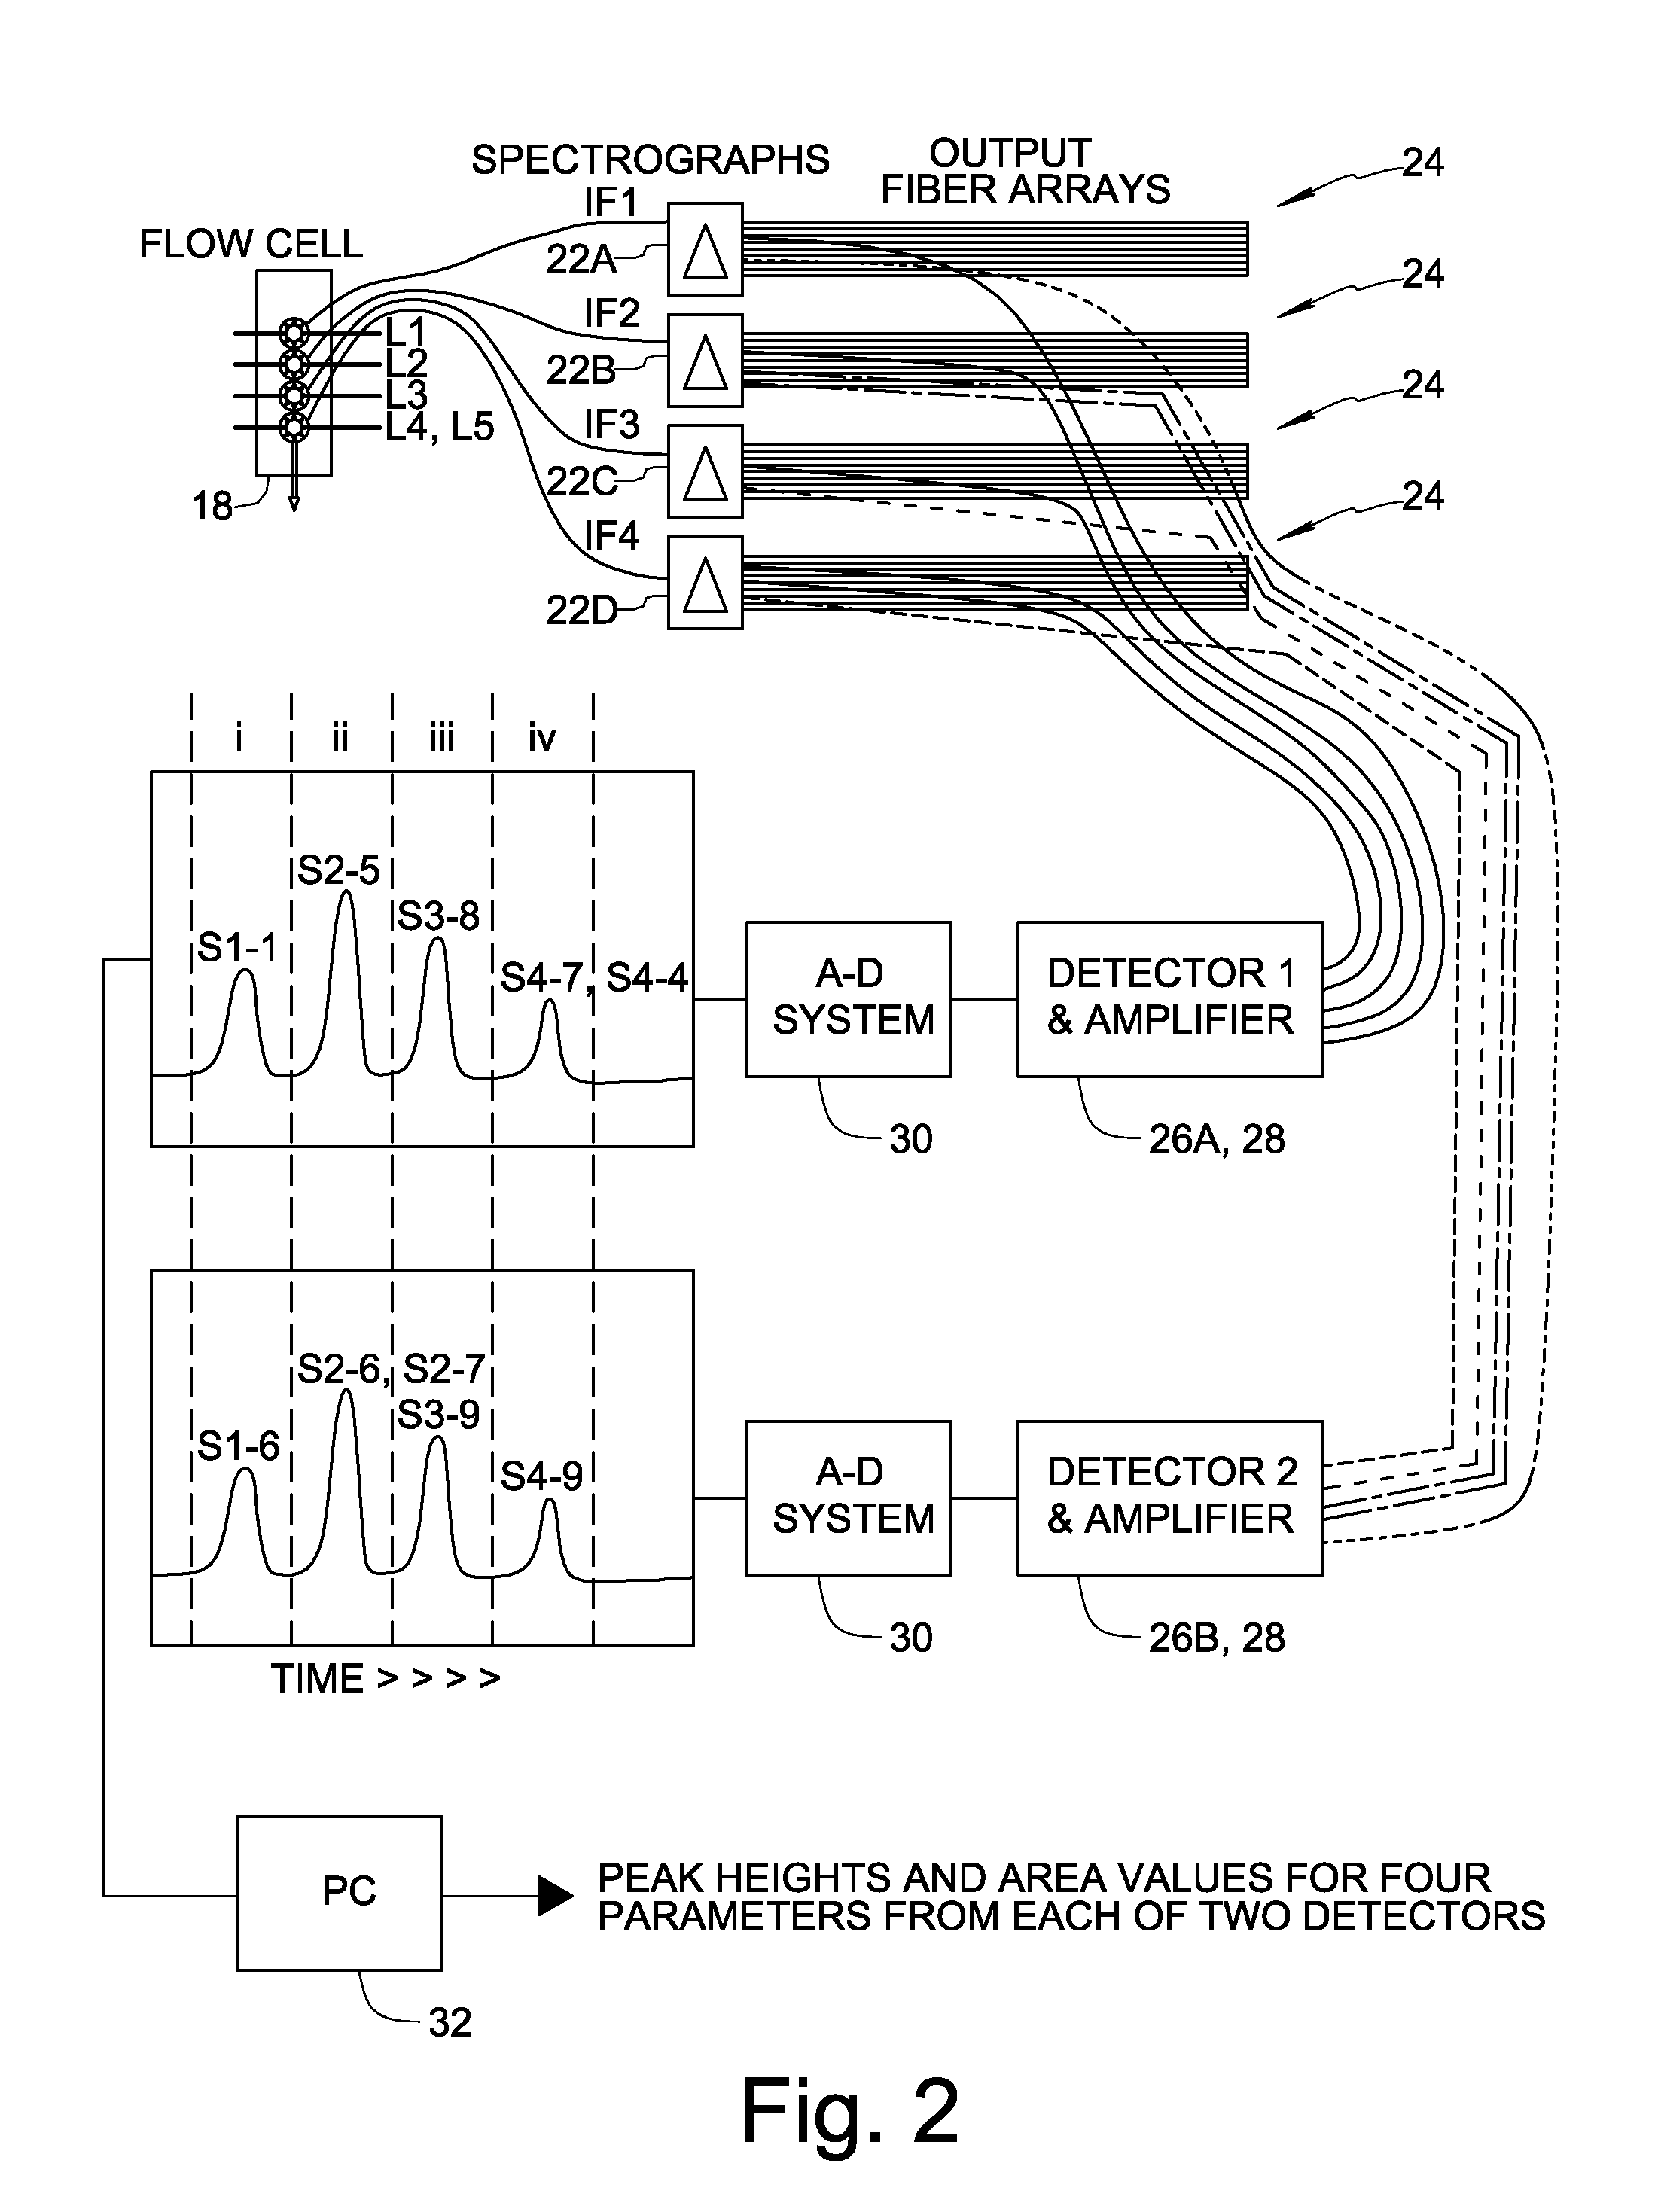 Flow cytometer acquisition and detection system